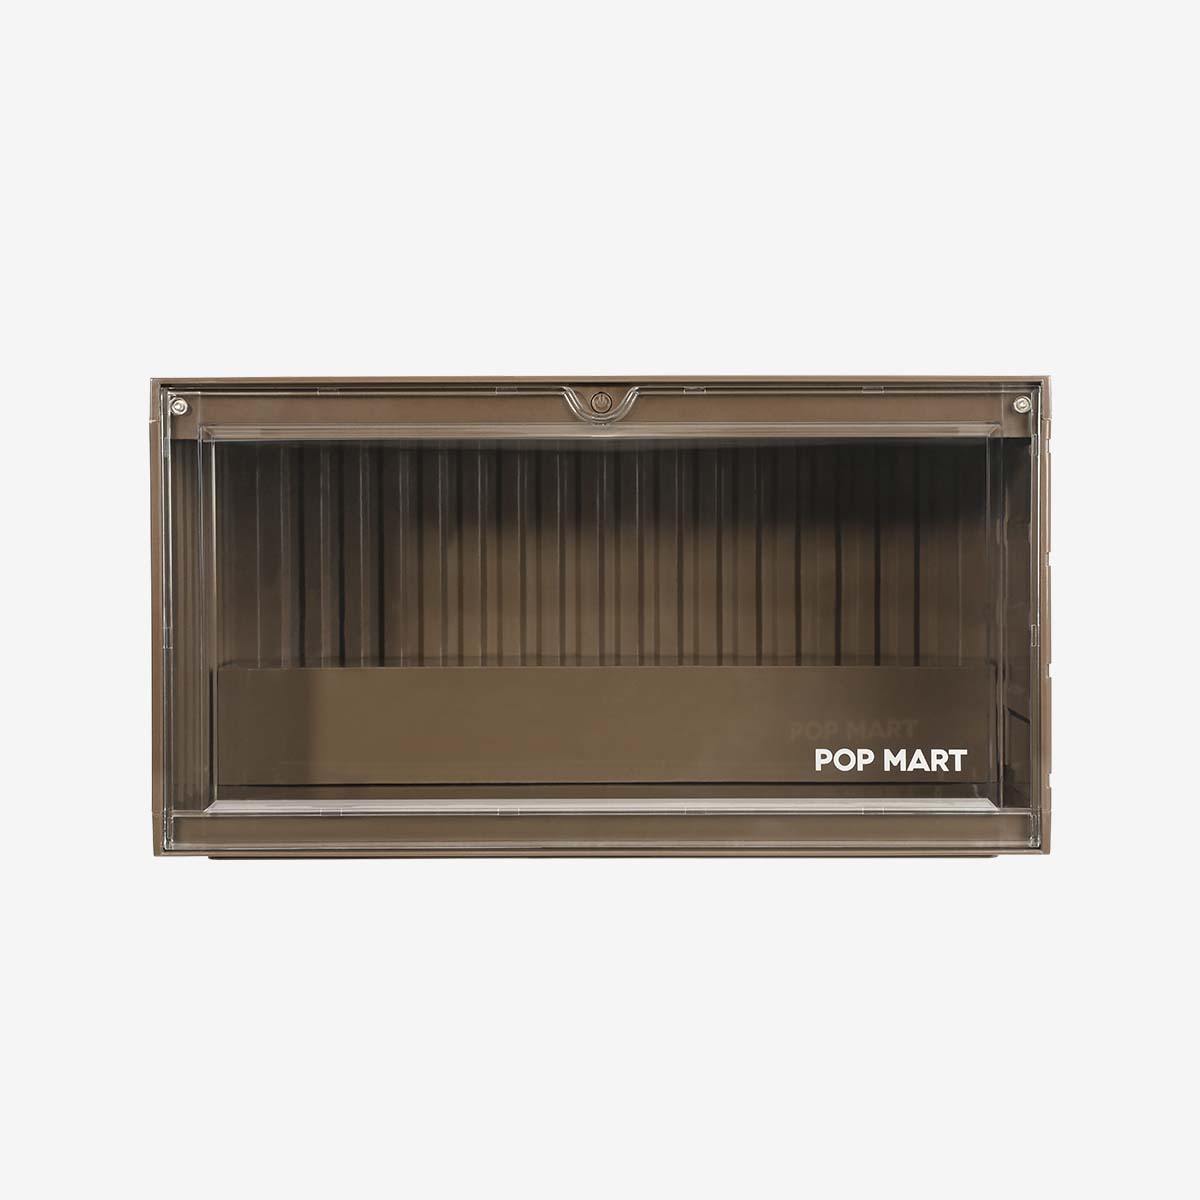 【Limited】POP MART Luminous Display Container (Coffee)